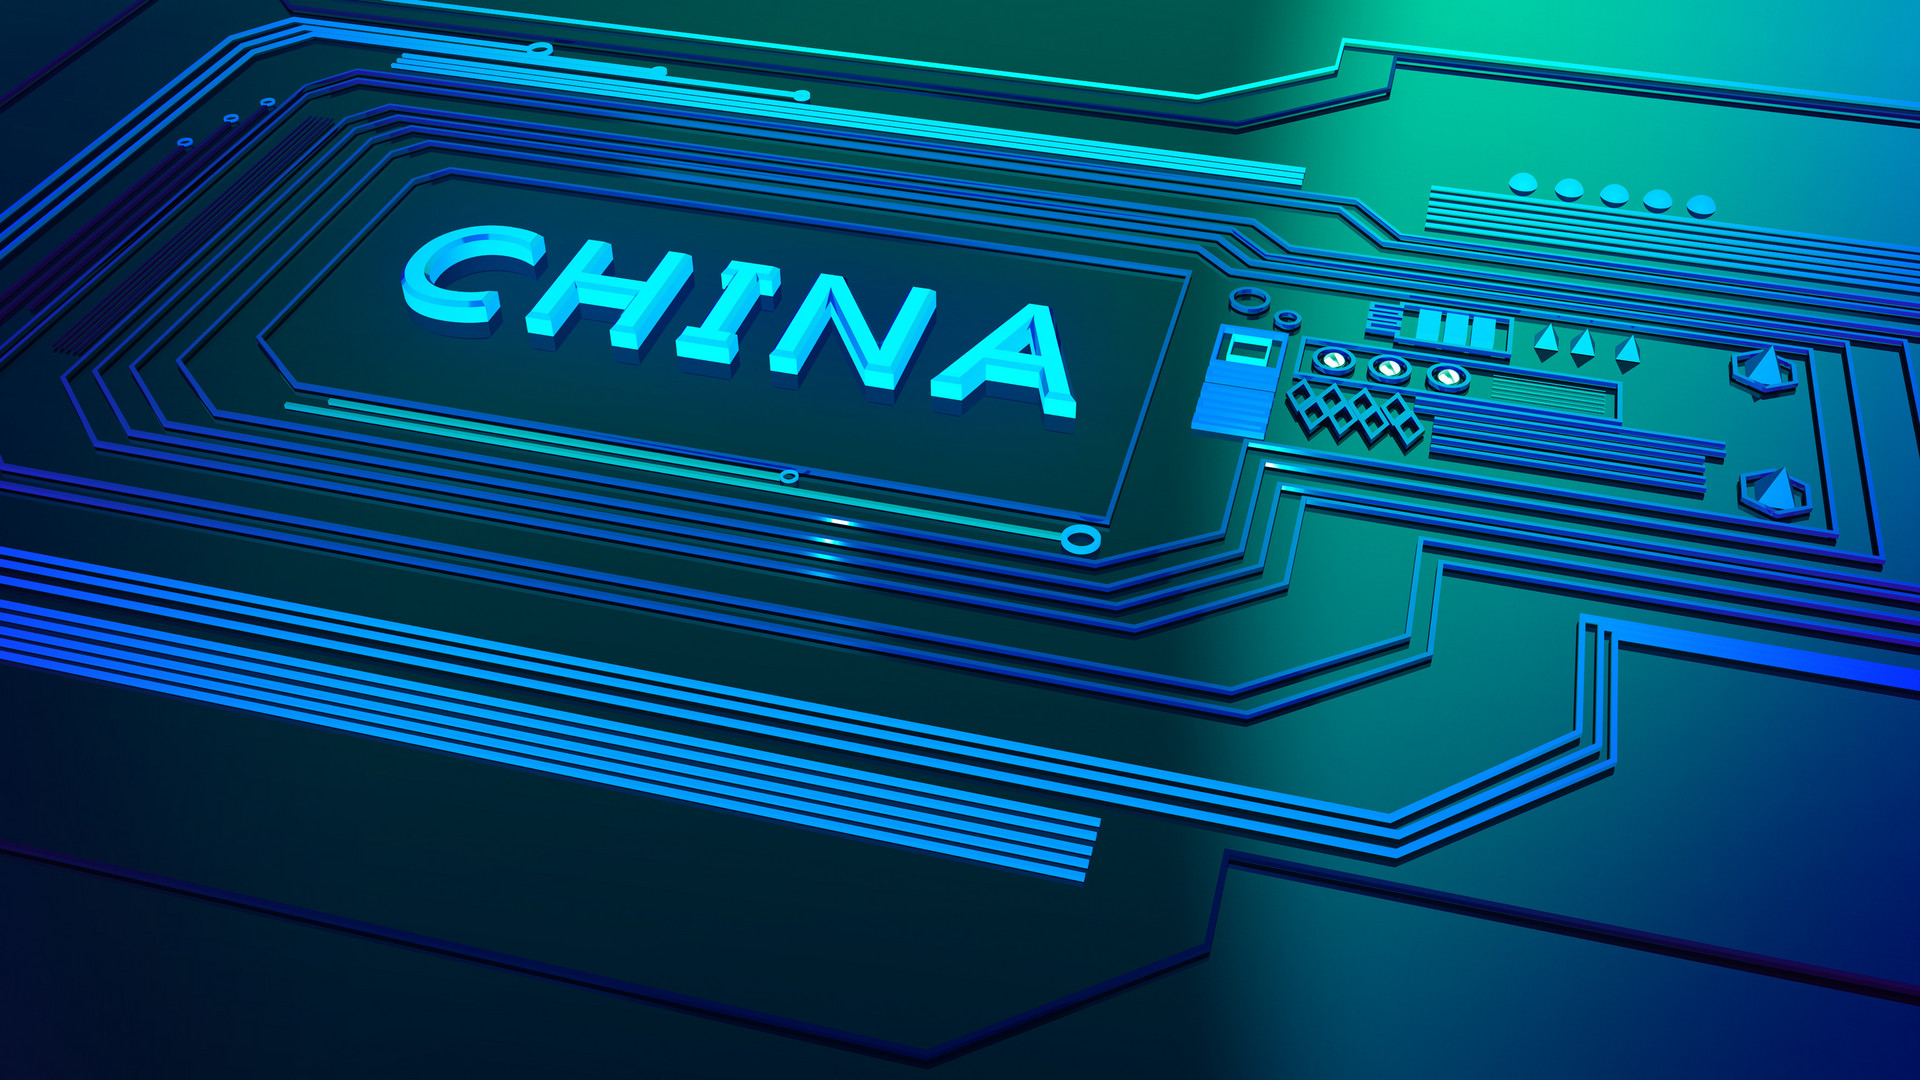 China’s Nvidia Contender Cambricon Tech Struggles To Push Chinese-Made AI Chips as It Marks 7th Consecutive Year of Losses – China Money Network